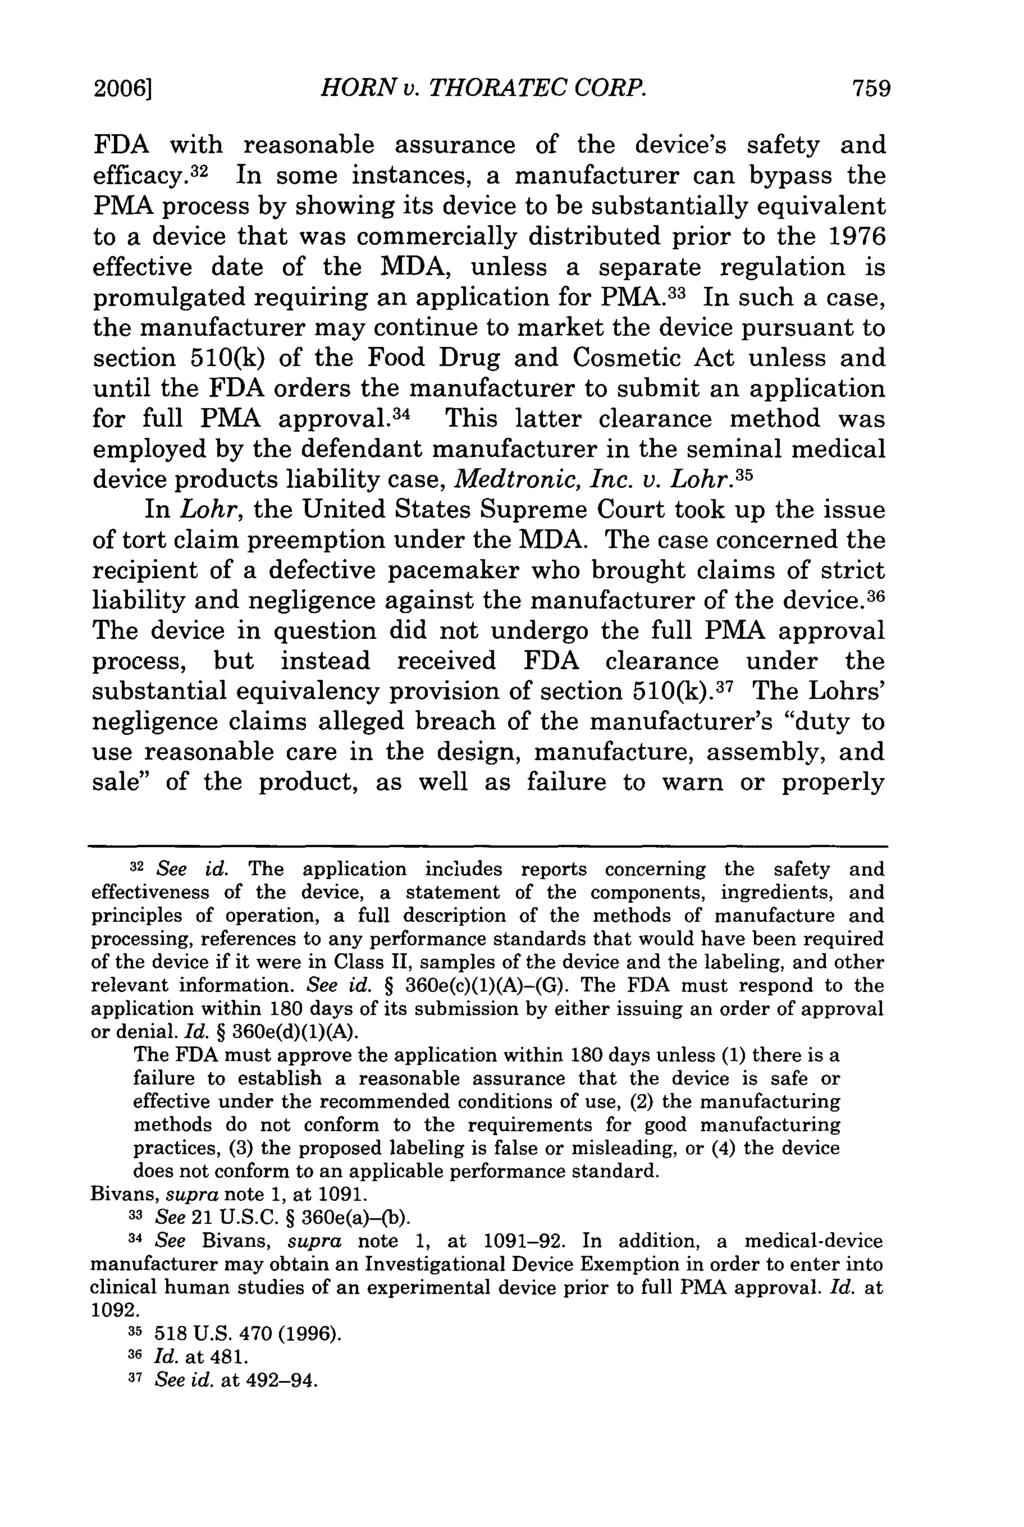 2006] HORN v. THORATEC CORP. FDA with reasonable assurance of the device's safety and efficacy.